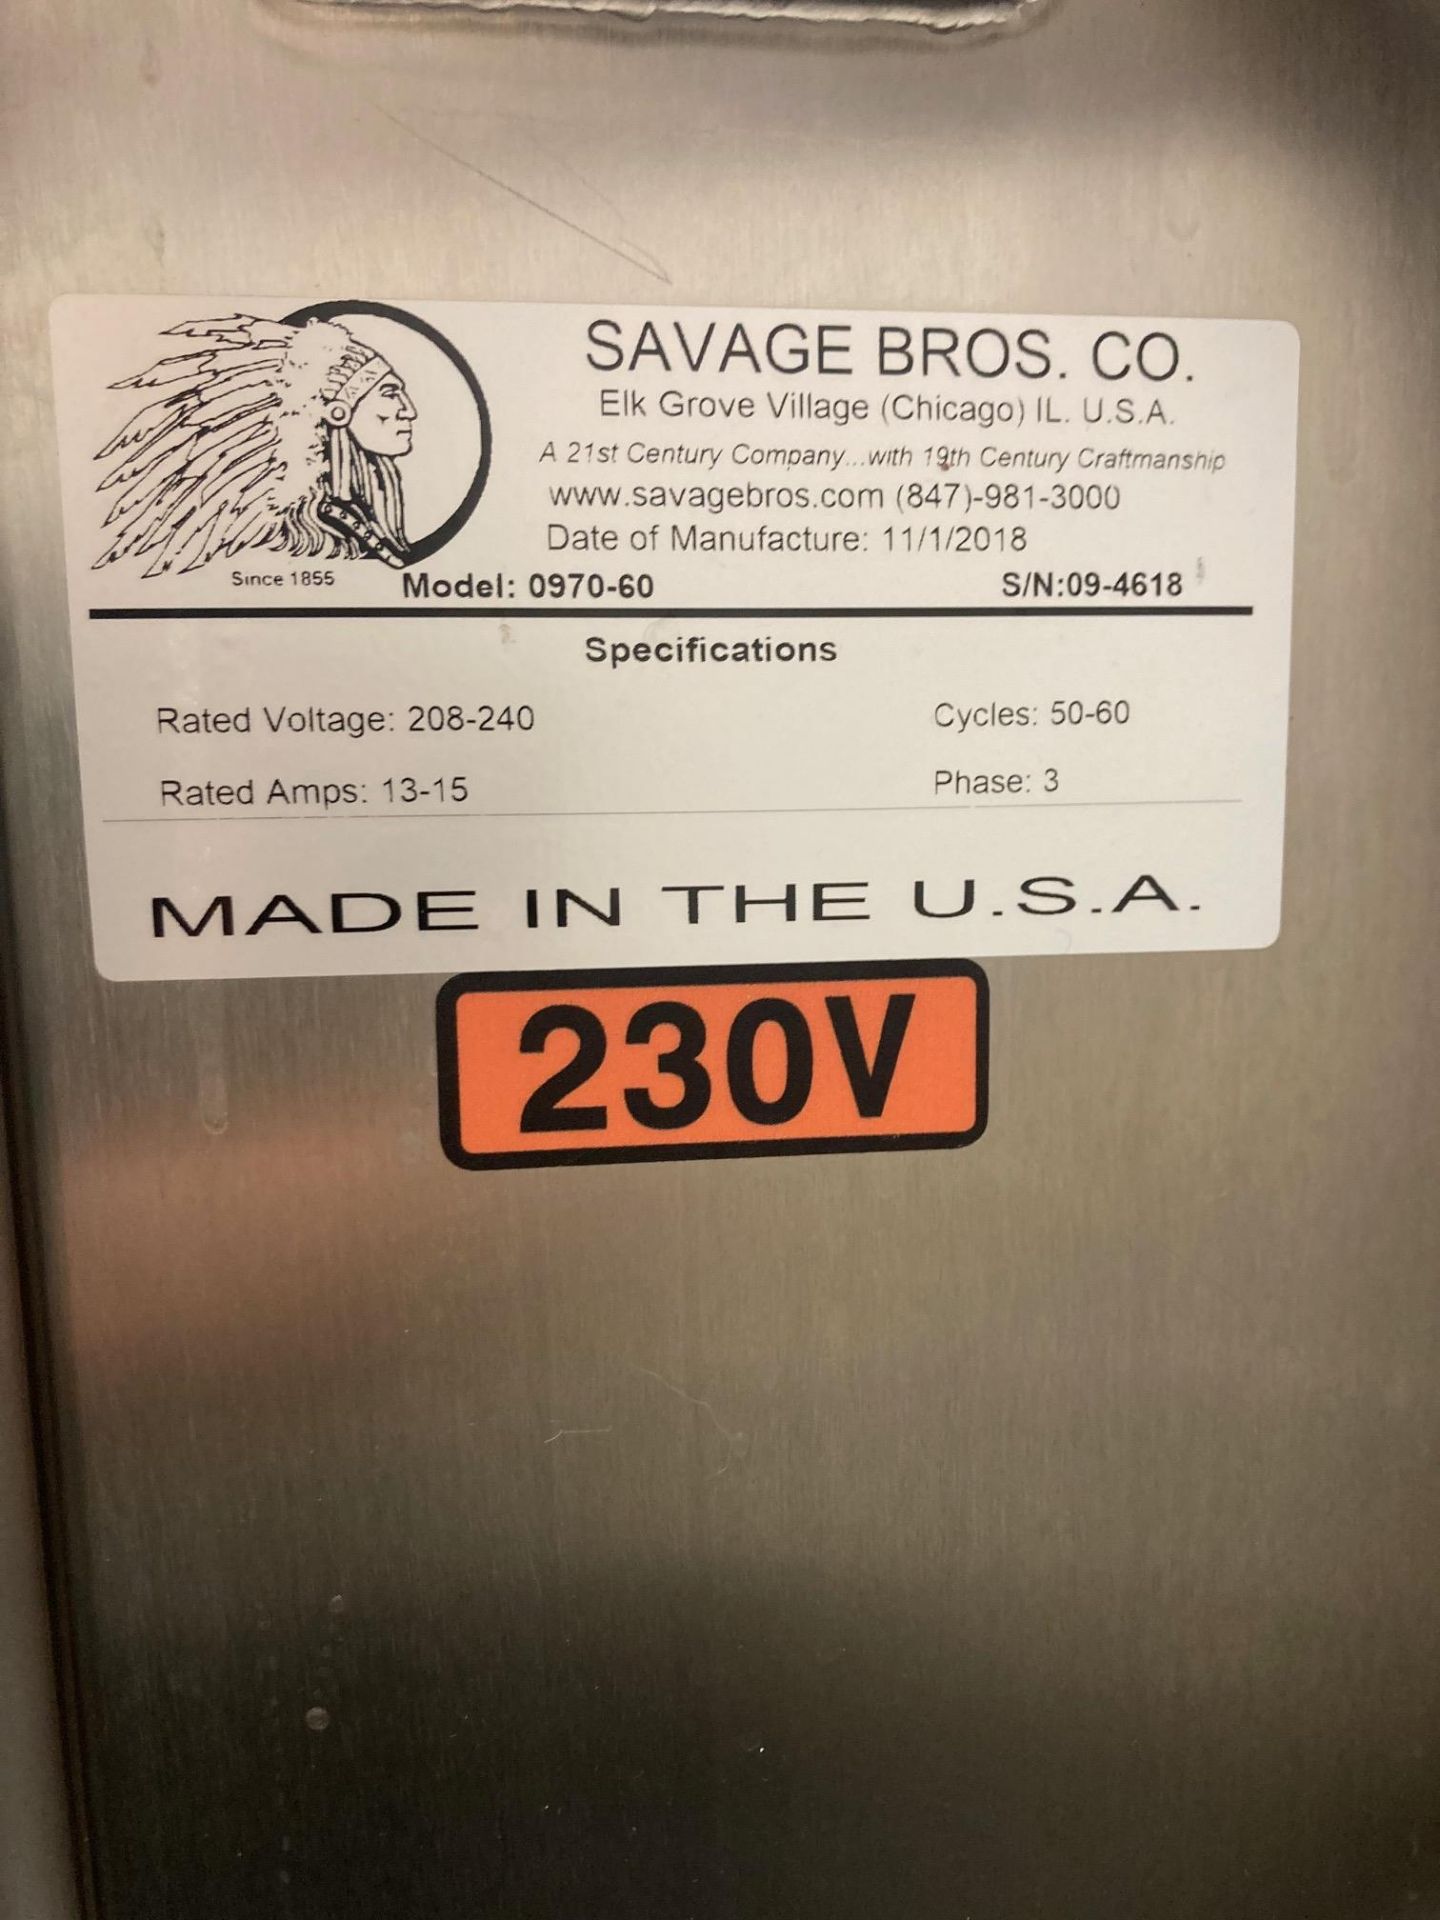 Used Savage Bros 450 lbs Chocolate Melter & Tempering Machine. Model 0970-60. Auto Batch Tempering - Image 5 of 10